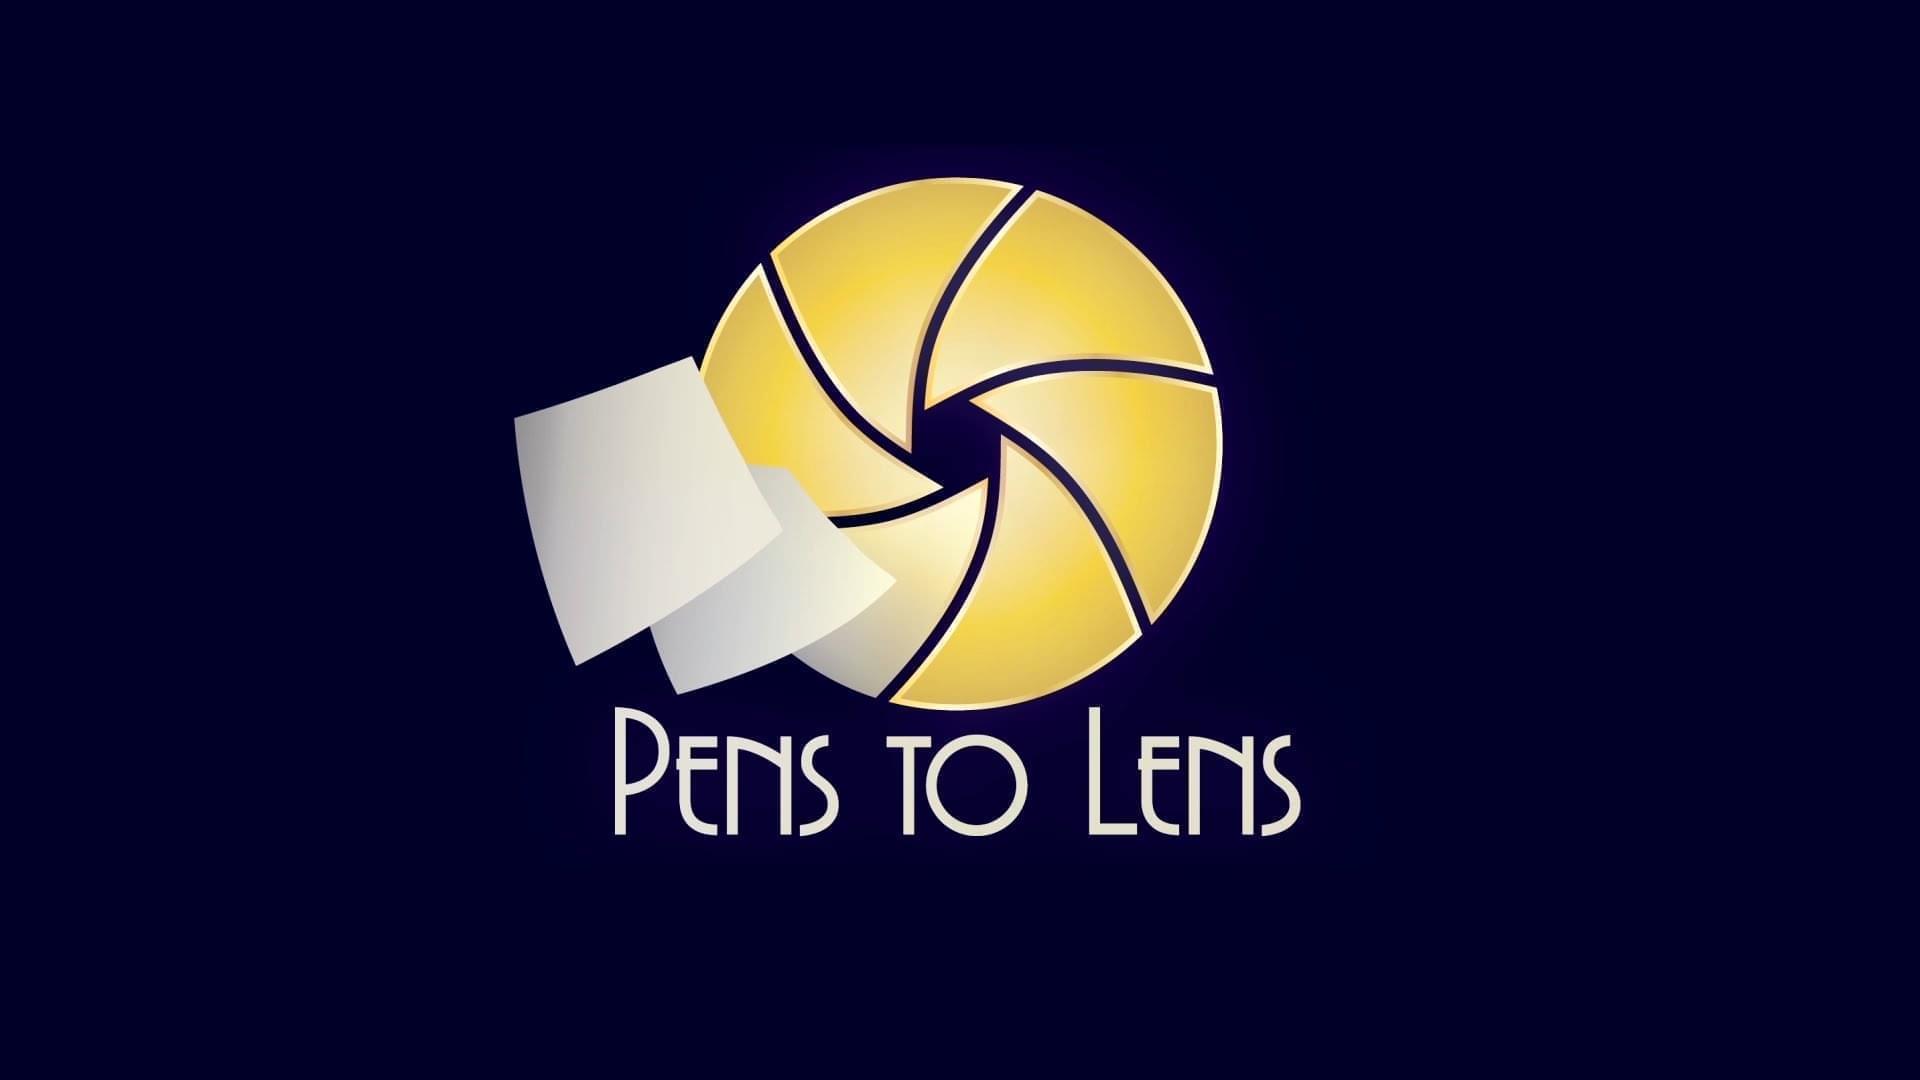 The Champaign-Urbana Film Society is accepting entries for this year's Pens to Lens student screenwriting and filmmaking competition.